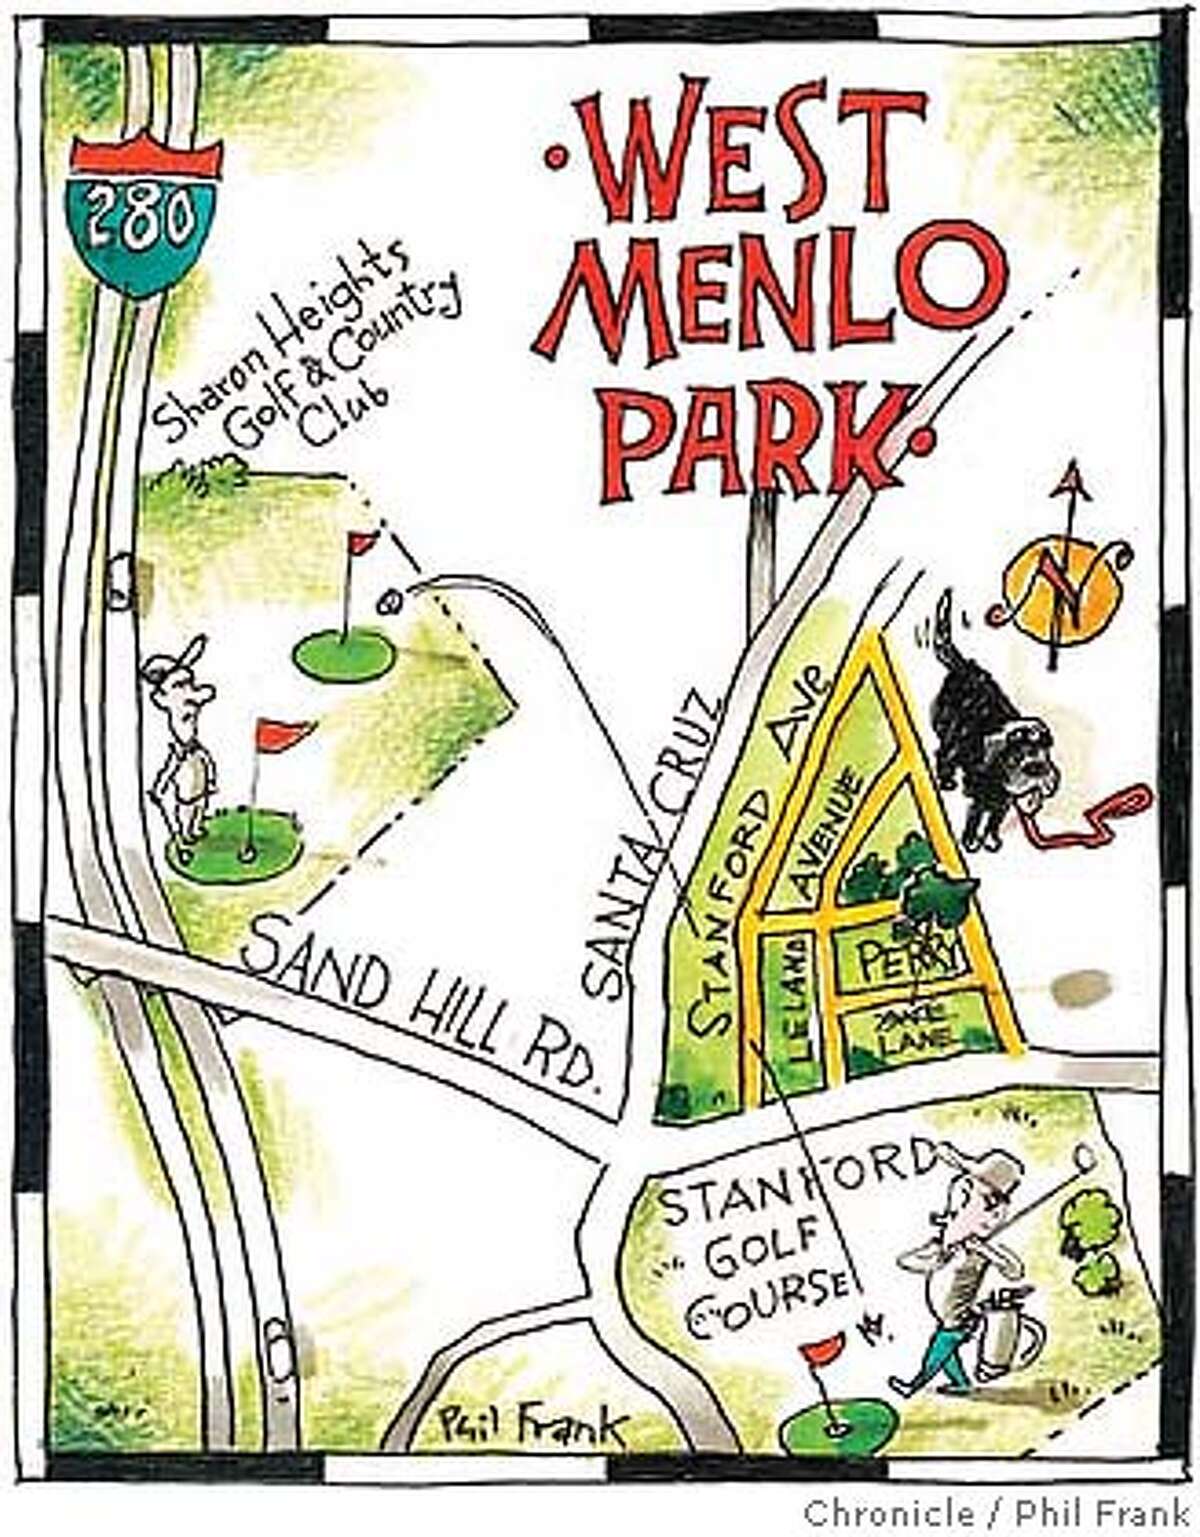 West Menlo Park. Chronicle illustration by Phil Frank